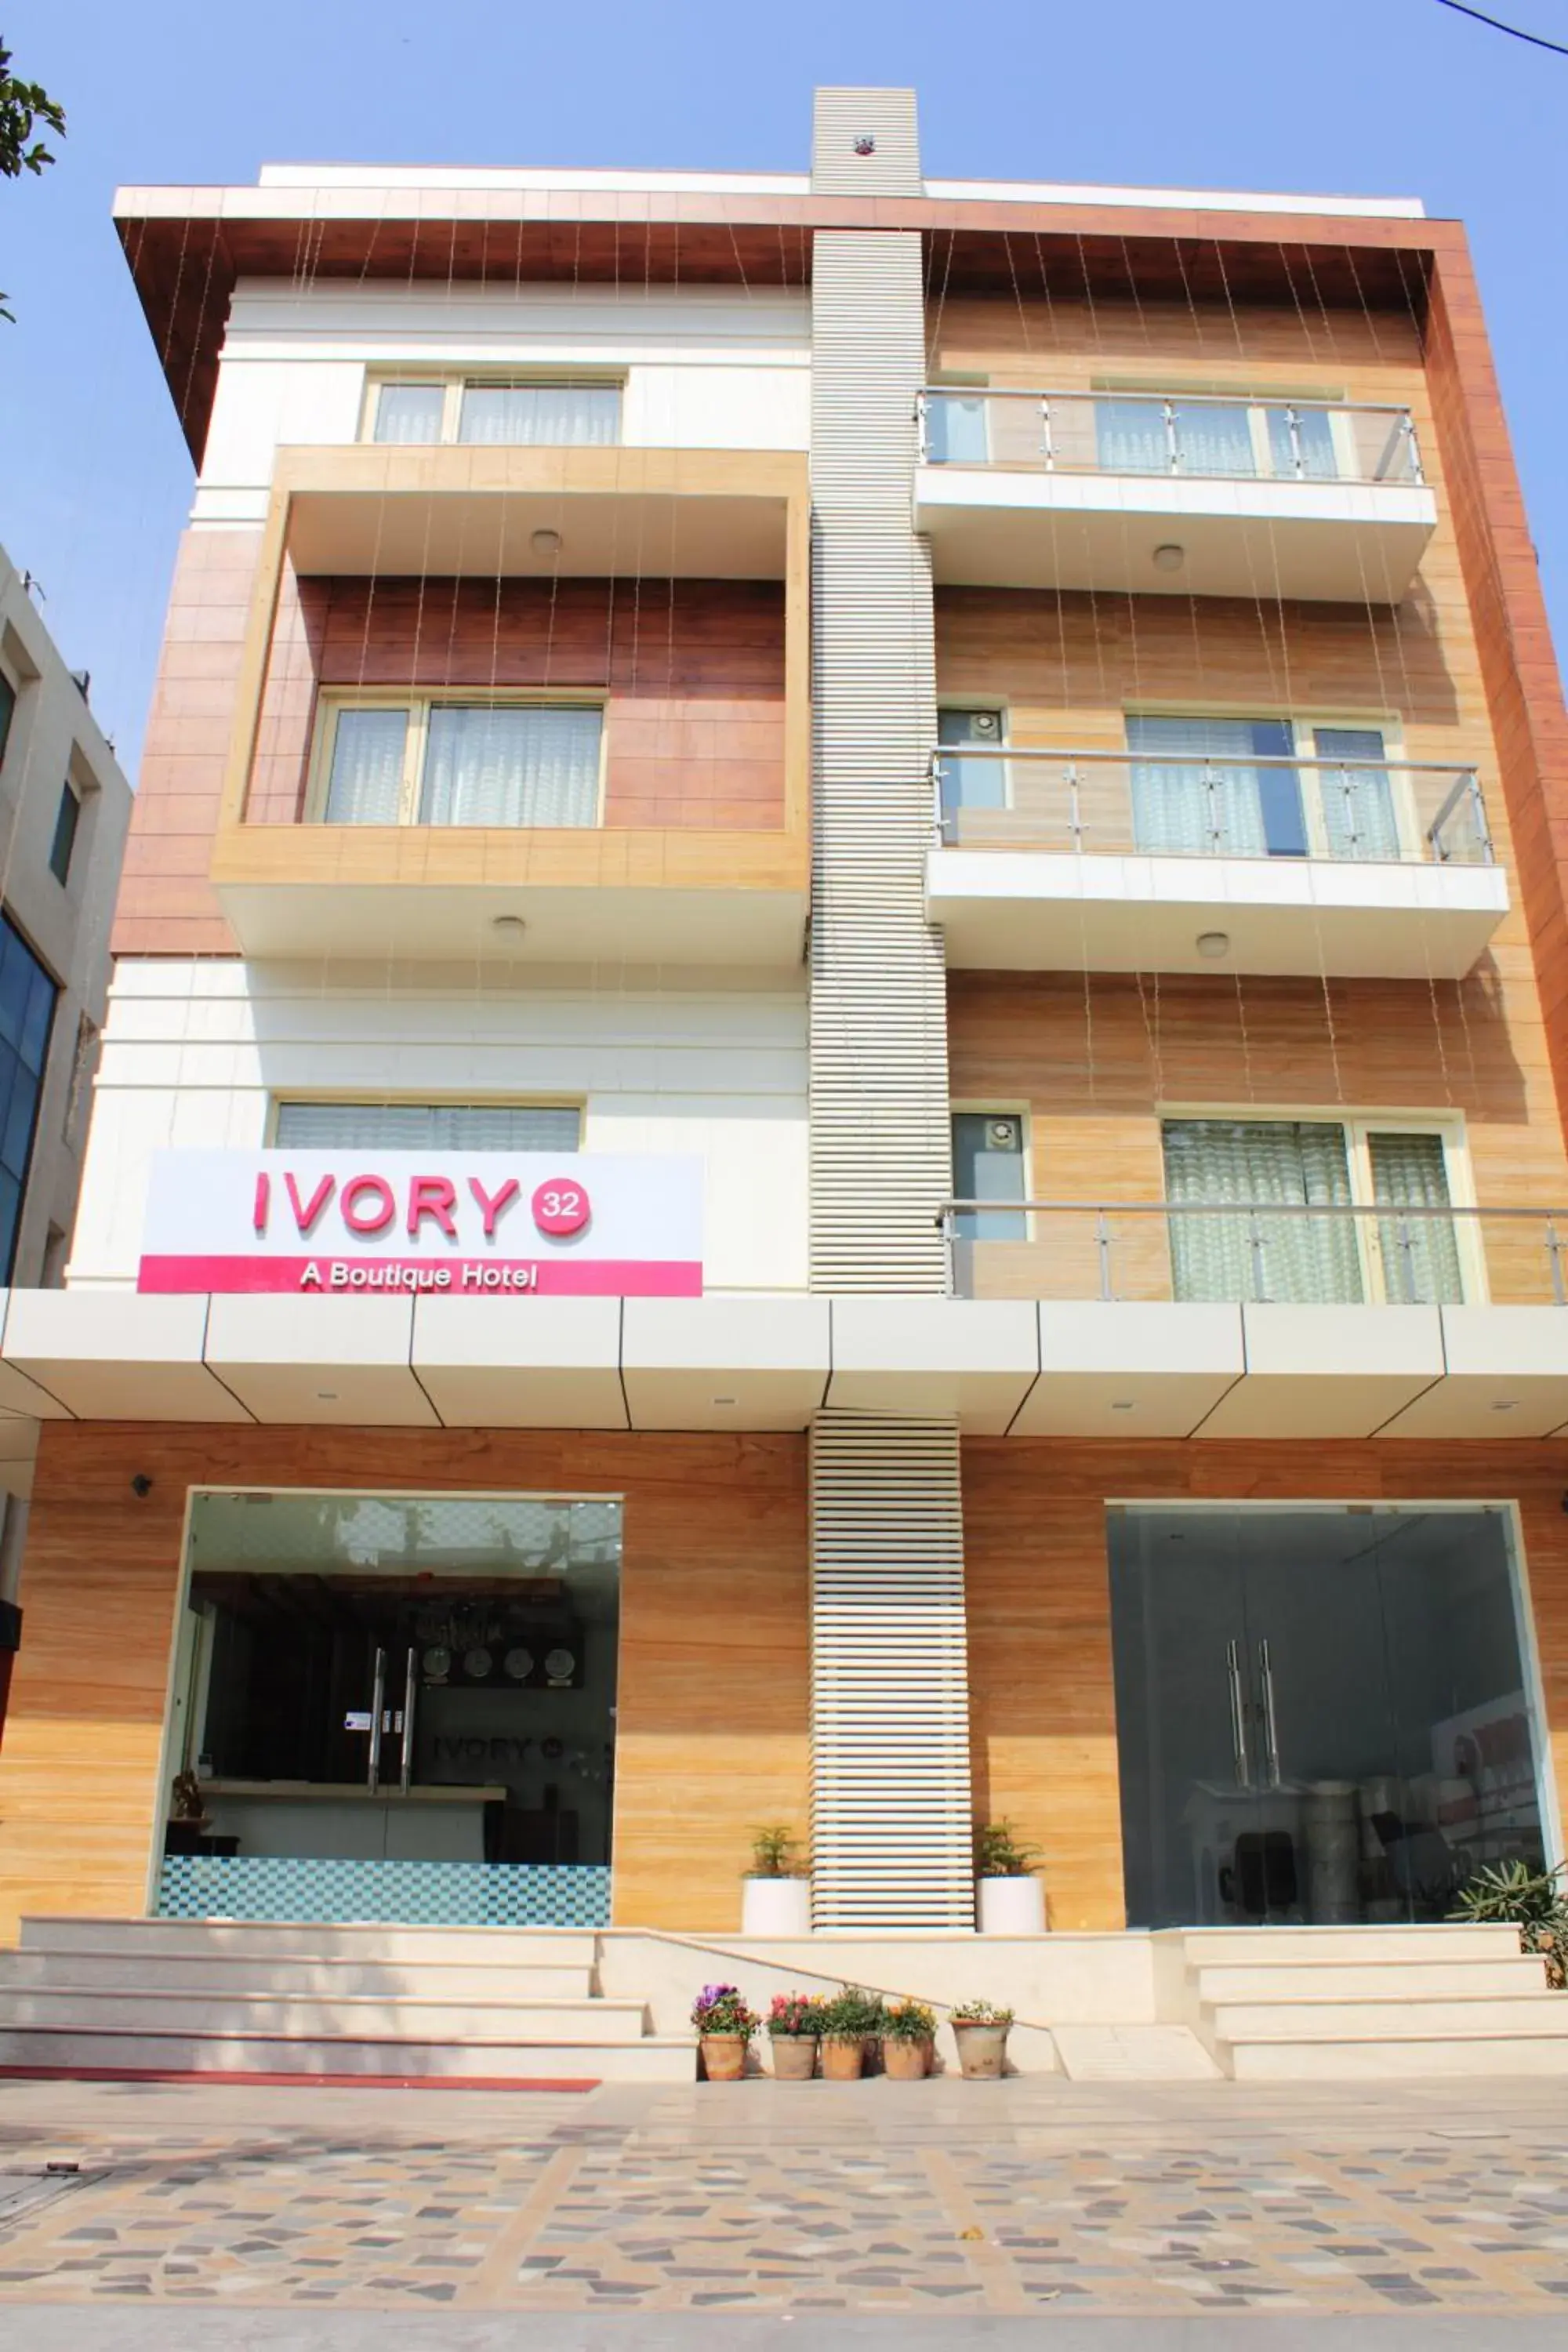 Property Building in Hotel Ivory 32